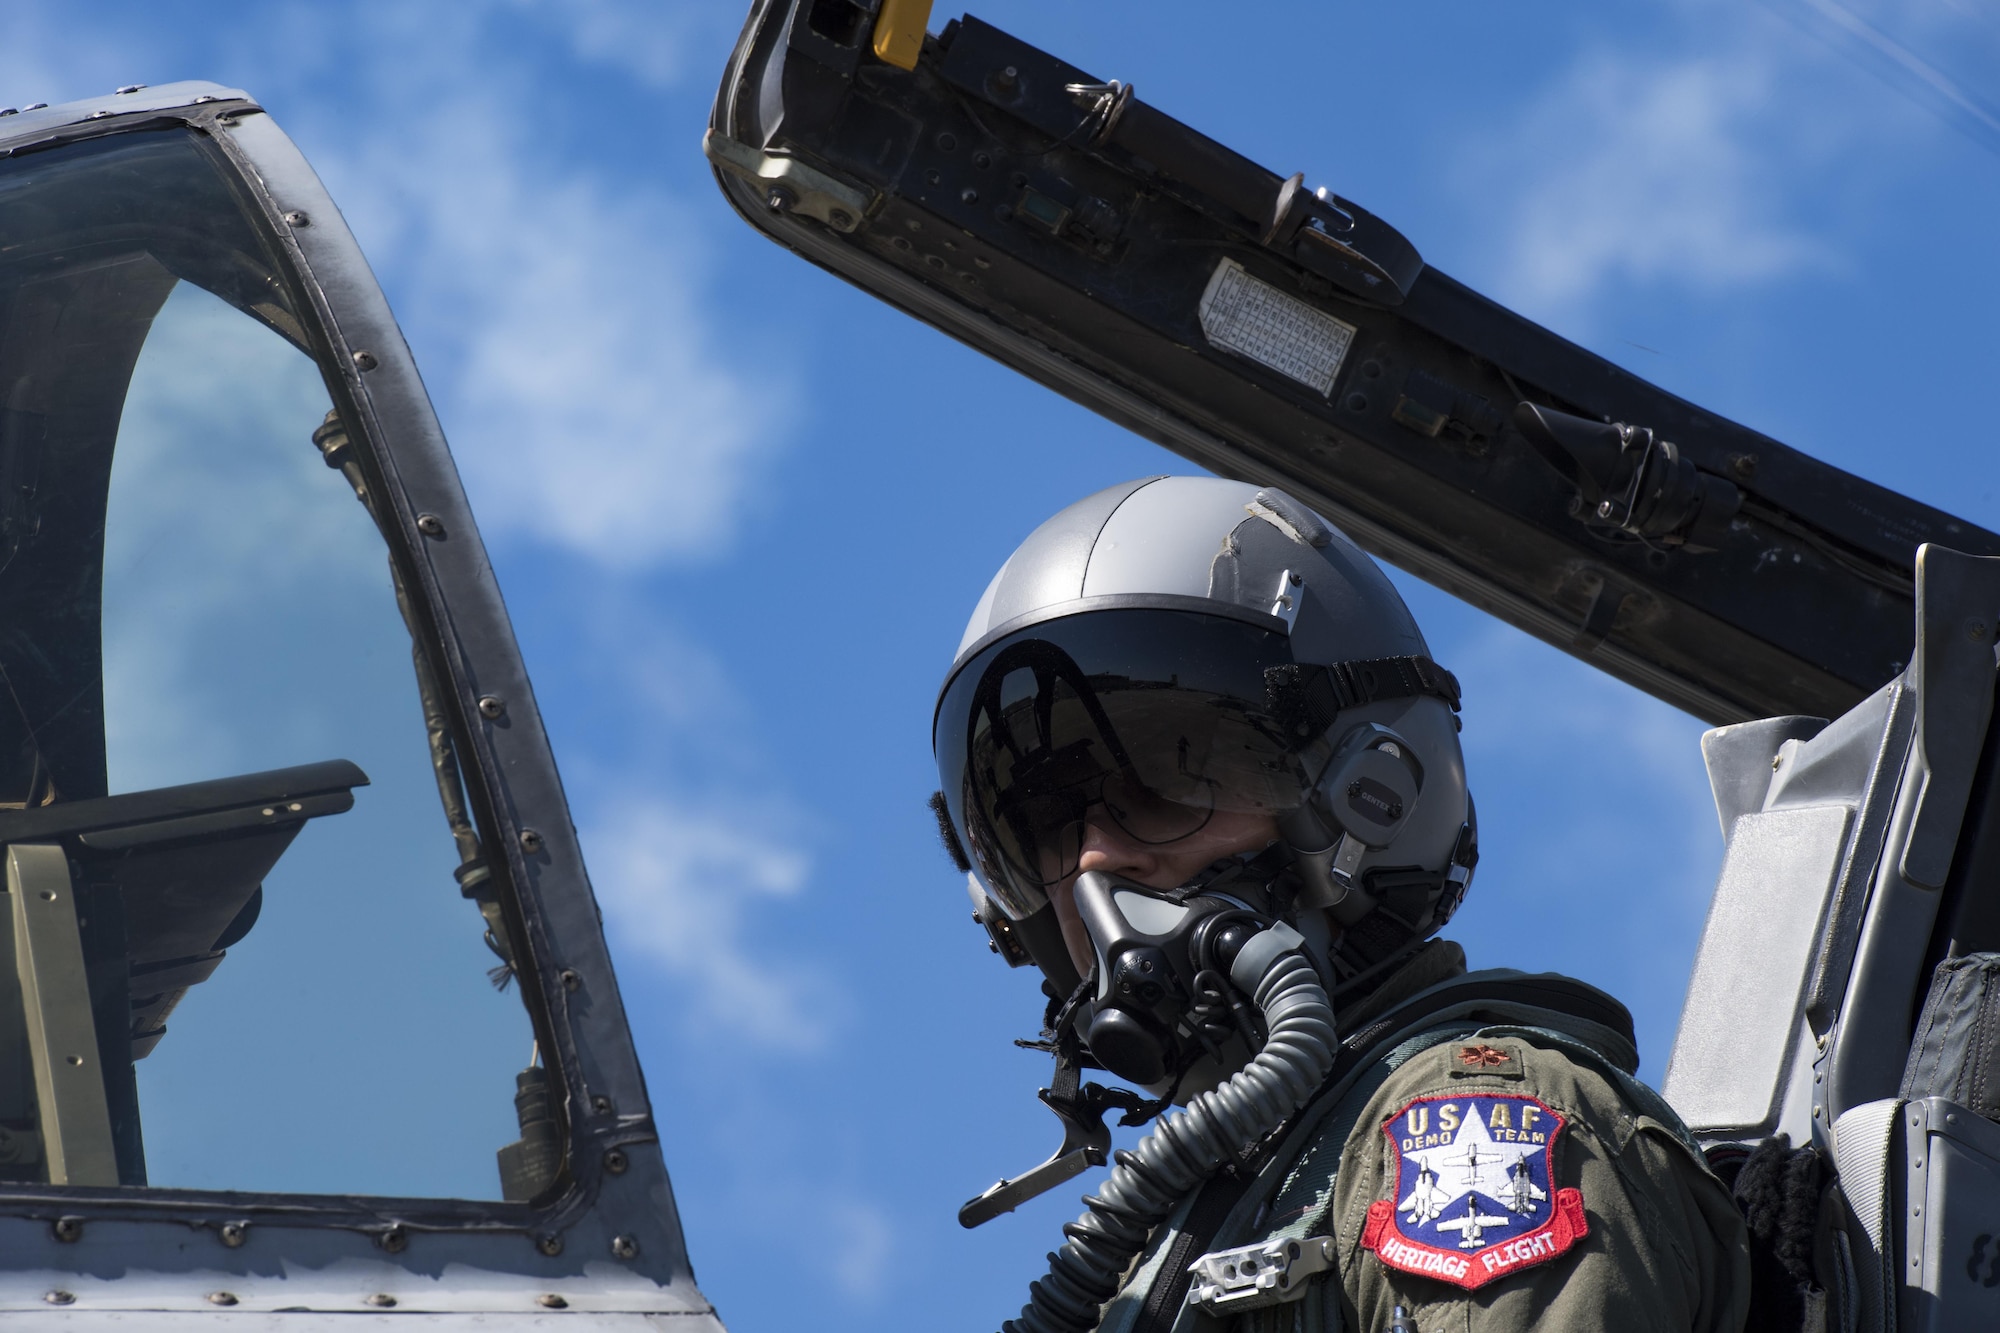 Maj. Joseph Morrin, A-10 Heritage Flight Team pilot, parks an A-10C Thunderbolt II, after performing in a heritage flight, Nov. 4, 2017, at Naval Air Station Jacksonville, Fla. The U.S. Air Force Heritage Flight program showcases past, present and future aircraft to spectators at air shows around the world. (U.S. Air Force photo by Staff Sgt. Eric Summers Jr.)